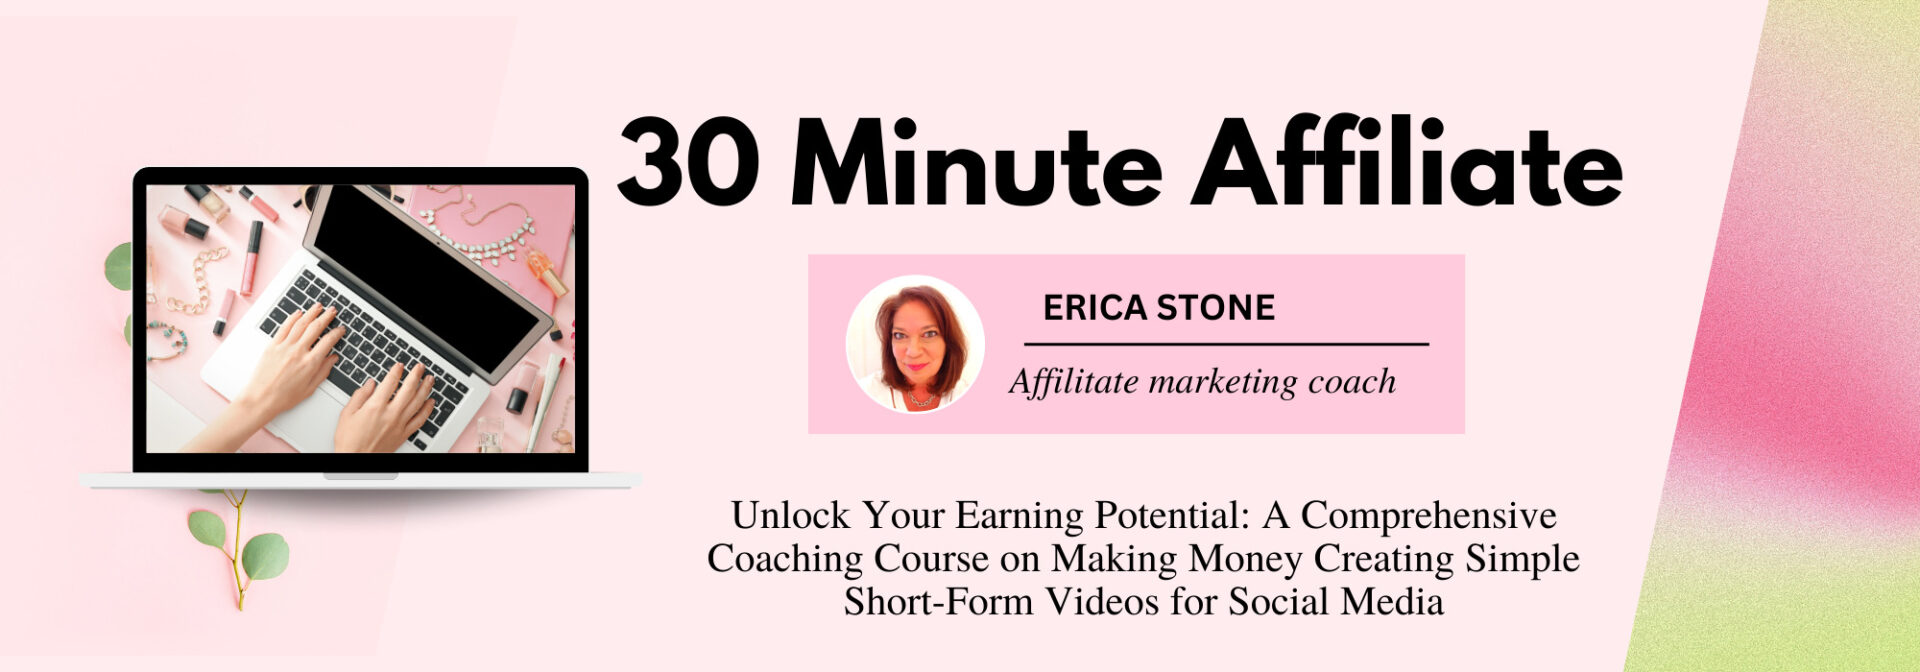 30 Minute Affiliate By Erica Stone